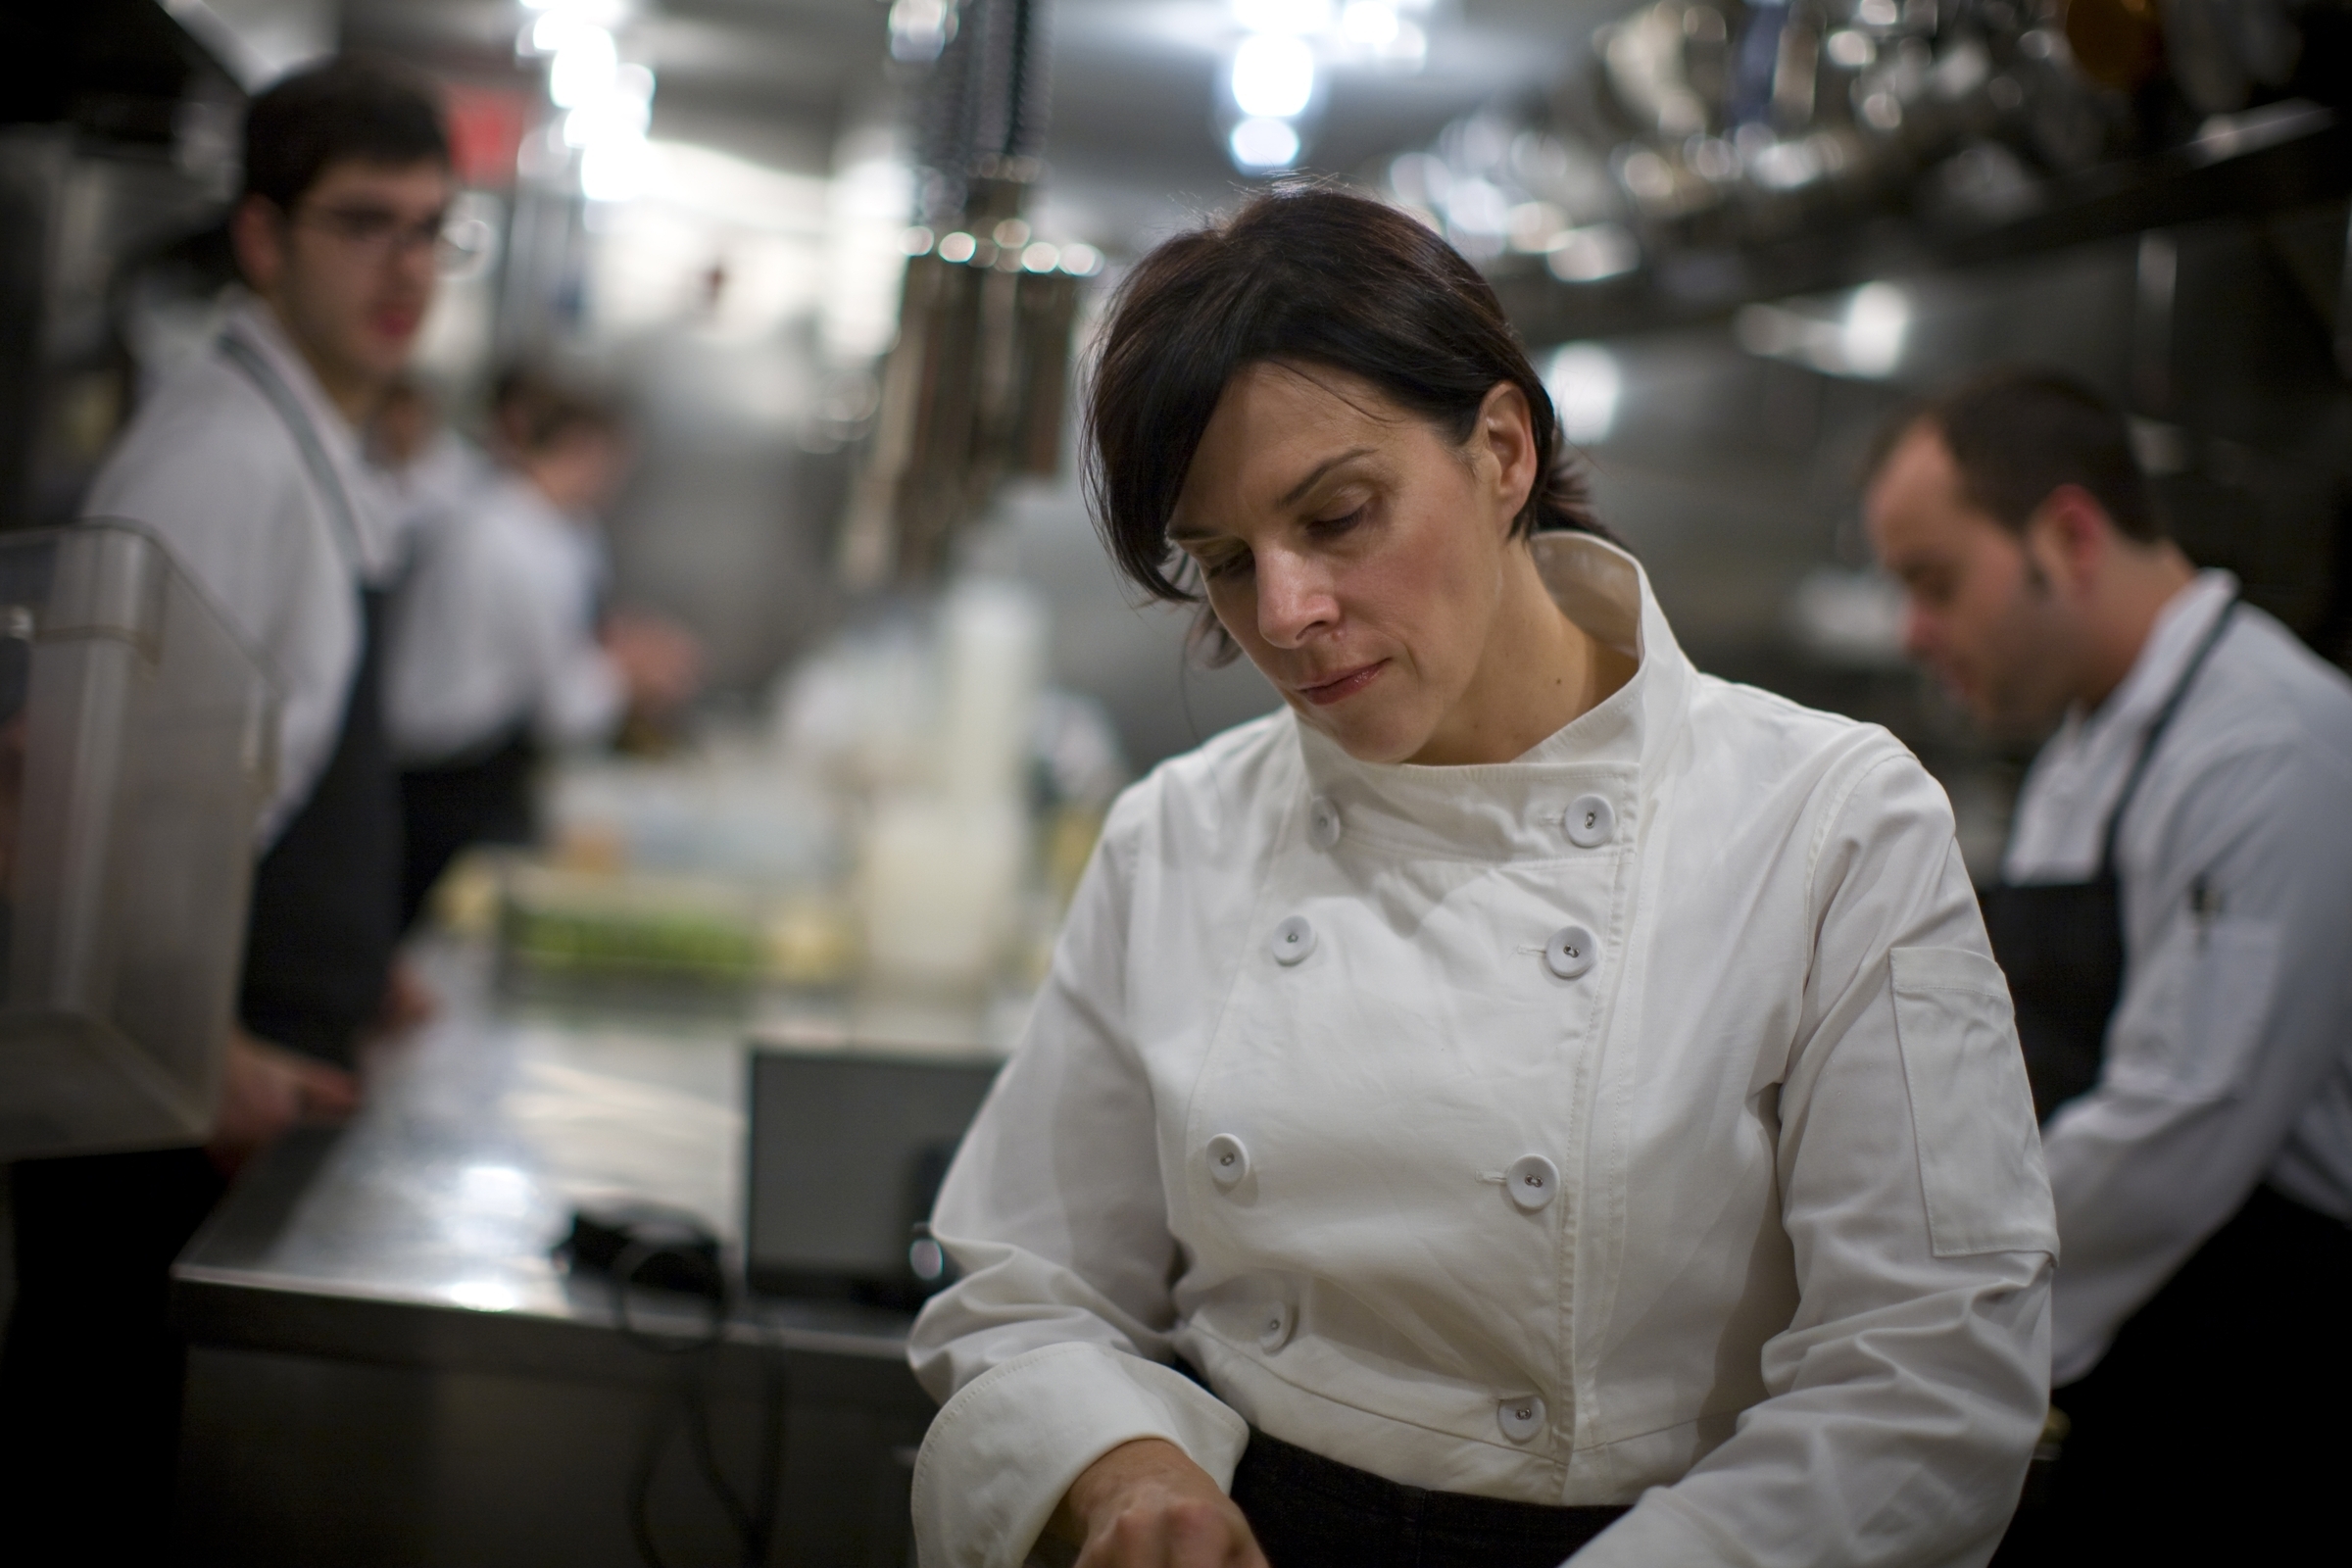 Chef Barbara Lynch, one of the foremost chefs in America, trained in the classic European manner through a series of apprenticeships under some of Boston's greatest culinary talent